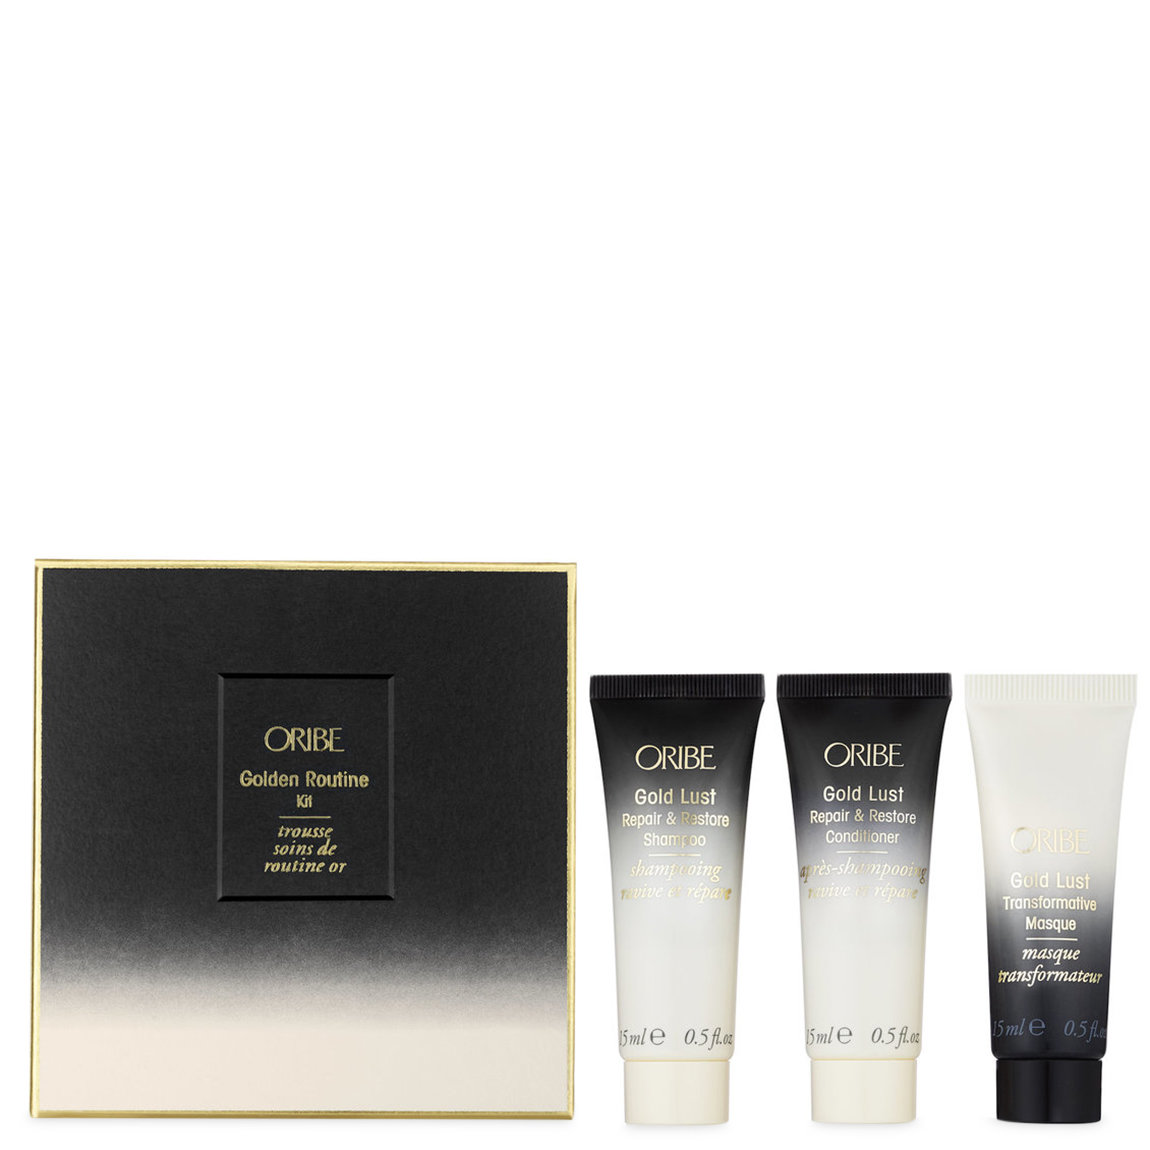 Free deluxe mini Golden Routine kit with qualifying Oribe purchase